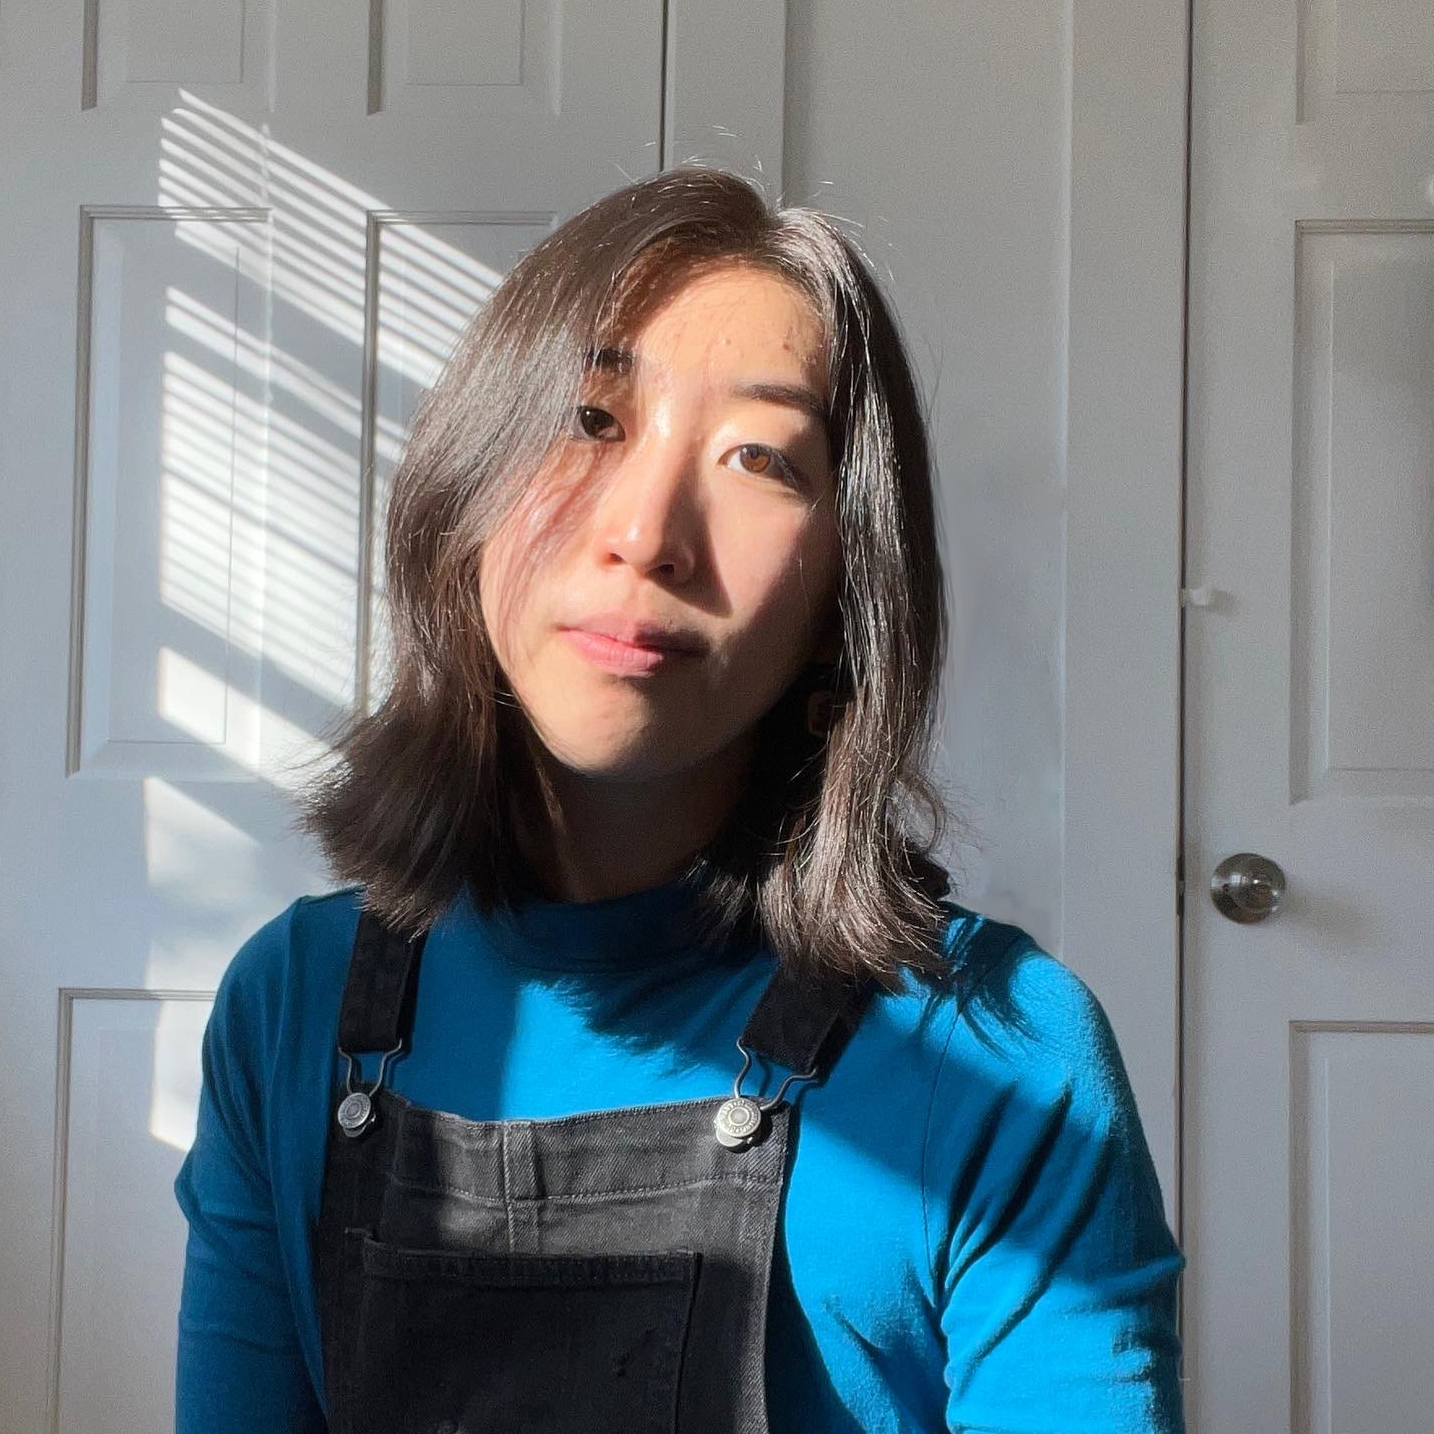 a picture of Angelina Han, an Asian woman with short brown hair, wearing a teal turtleneck and black overalls.